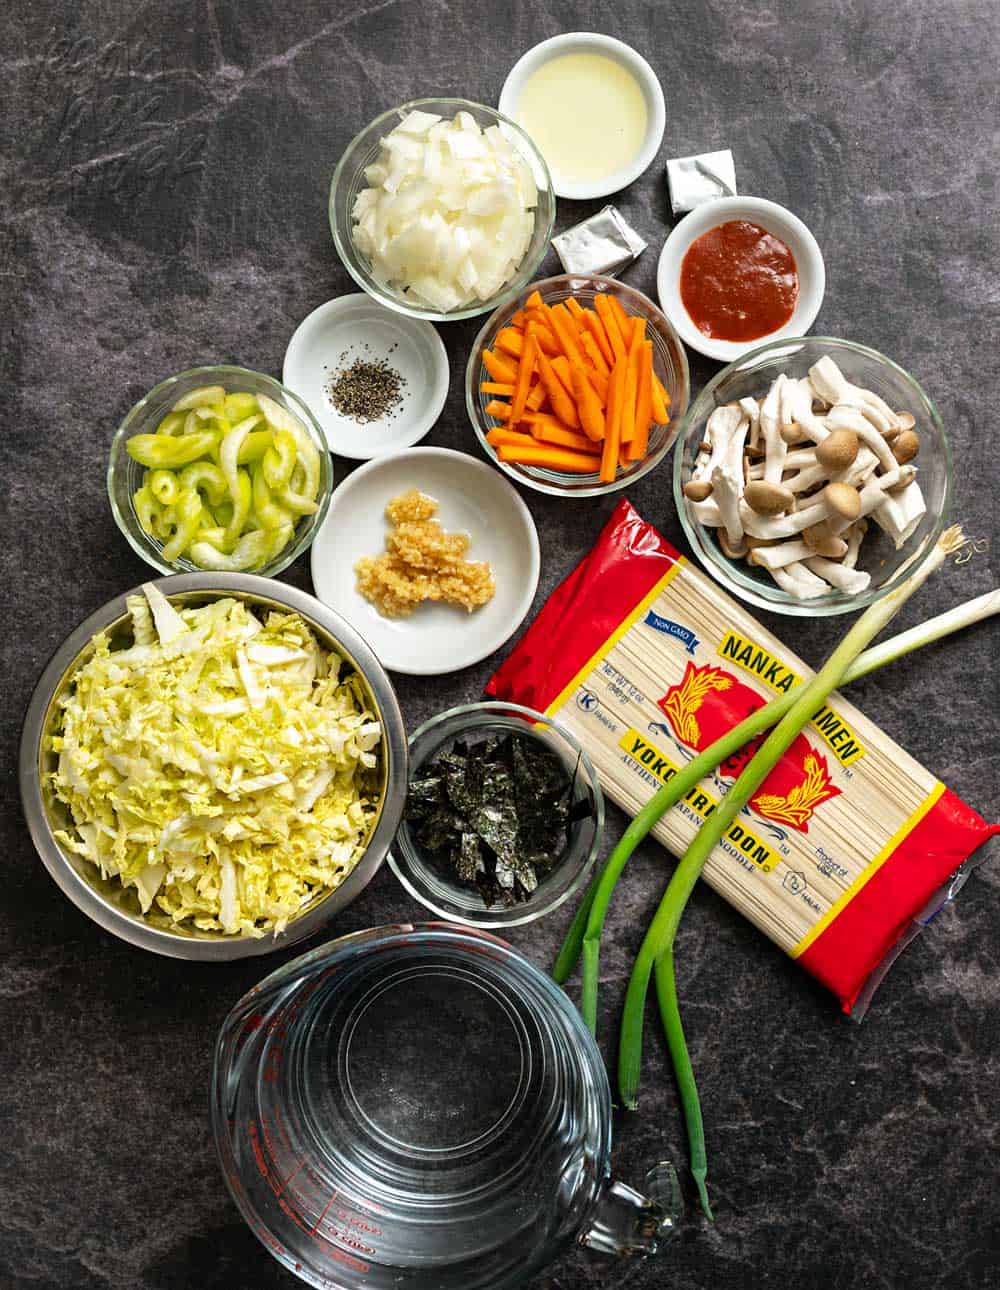 Noodles, veggies, and other ingredients for soup in bowls